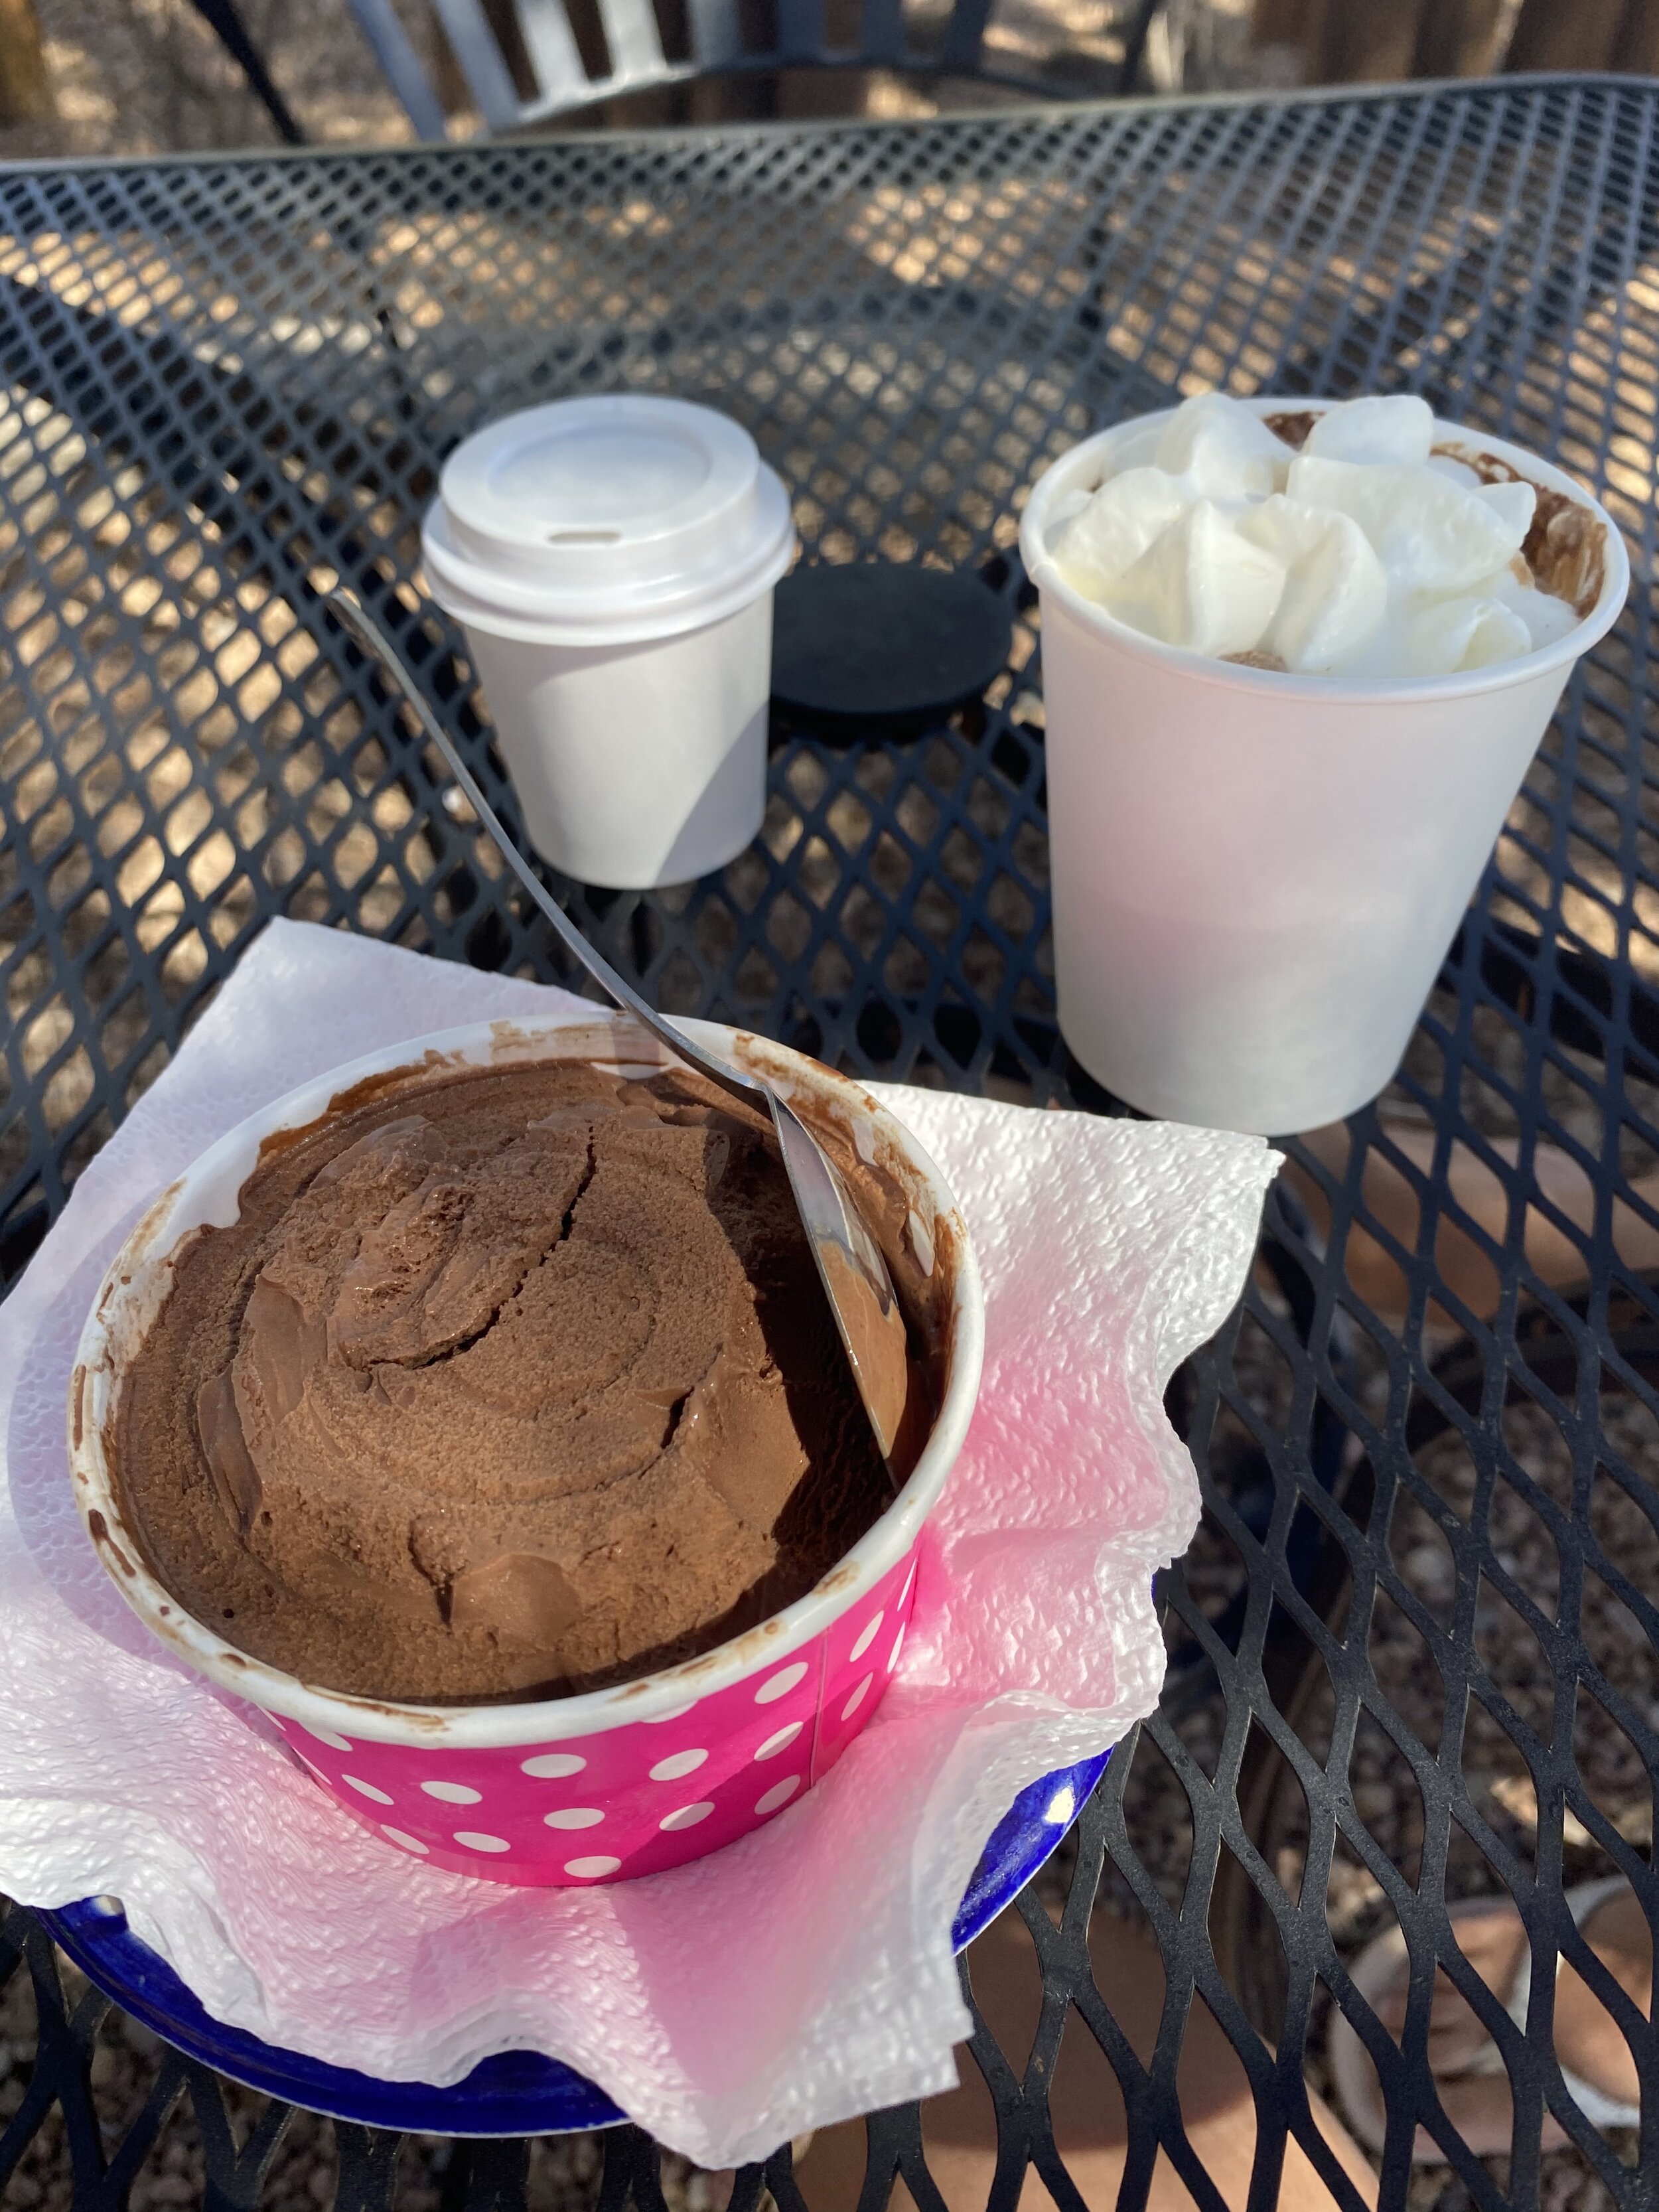 Small bowl of chocolate chili ice cream and cup of hot chocolate on a table